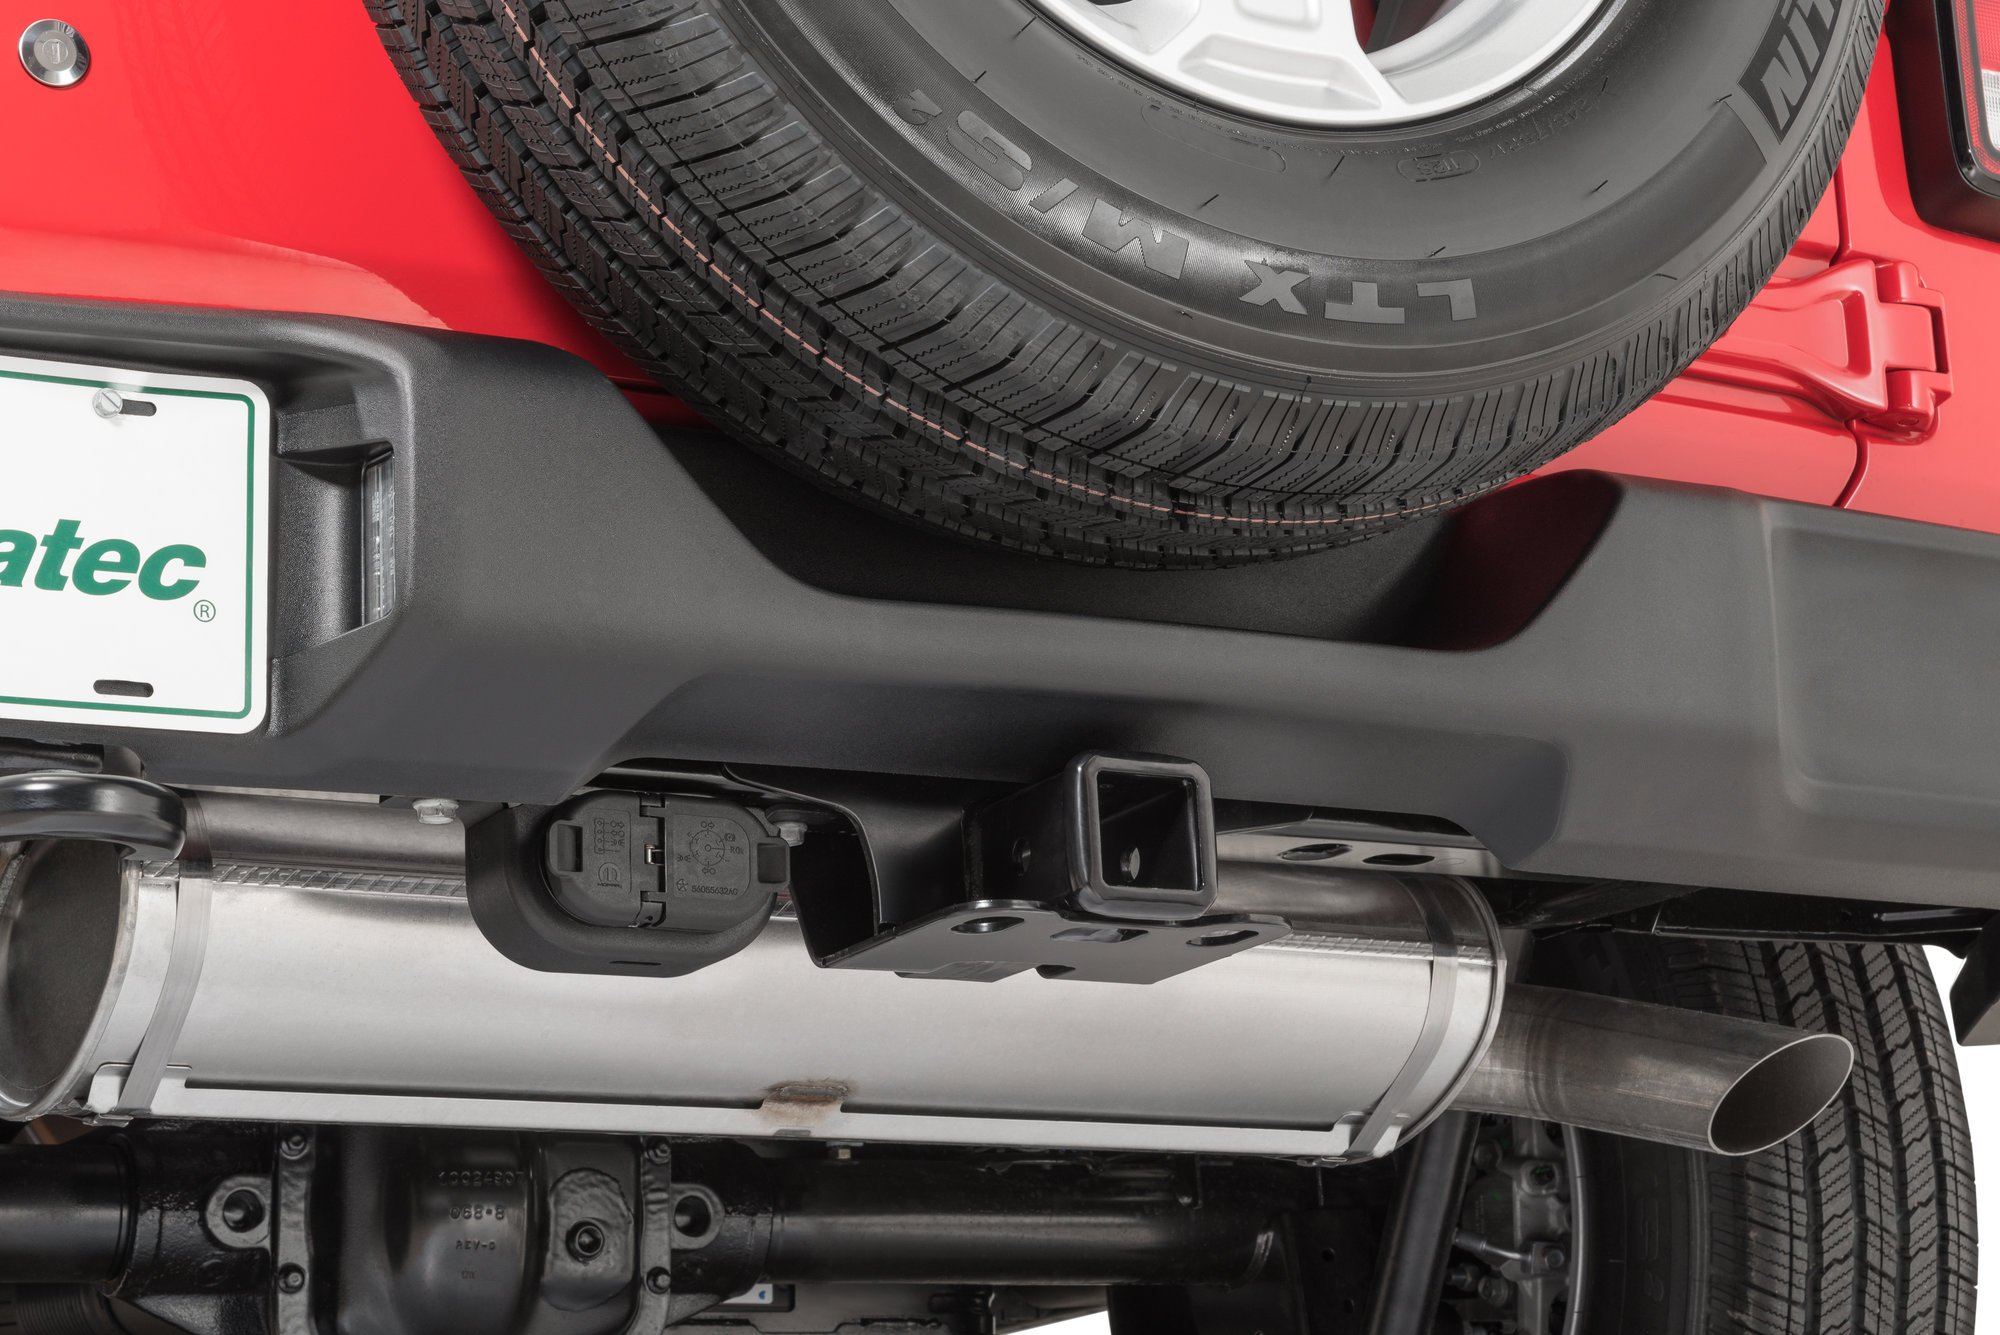 instructions for installing towbar electrics in kluger